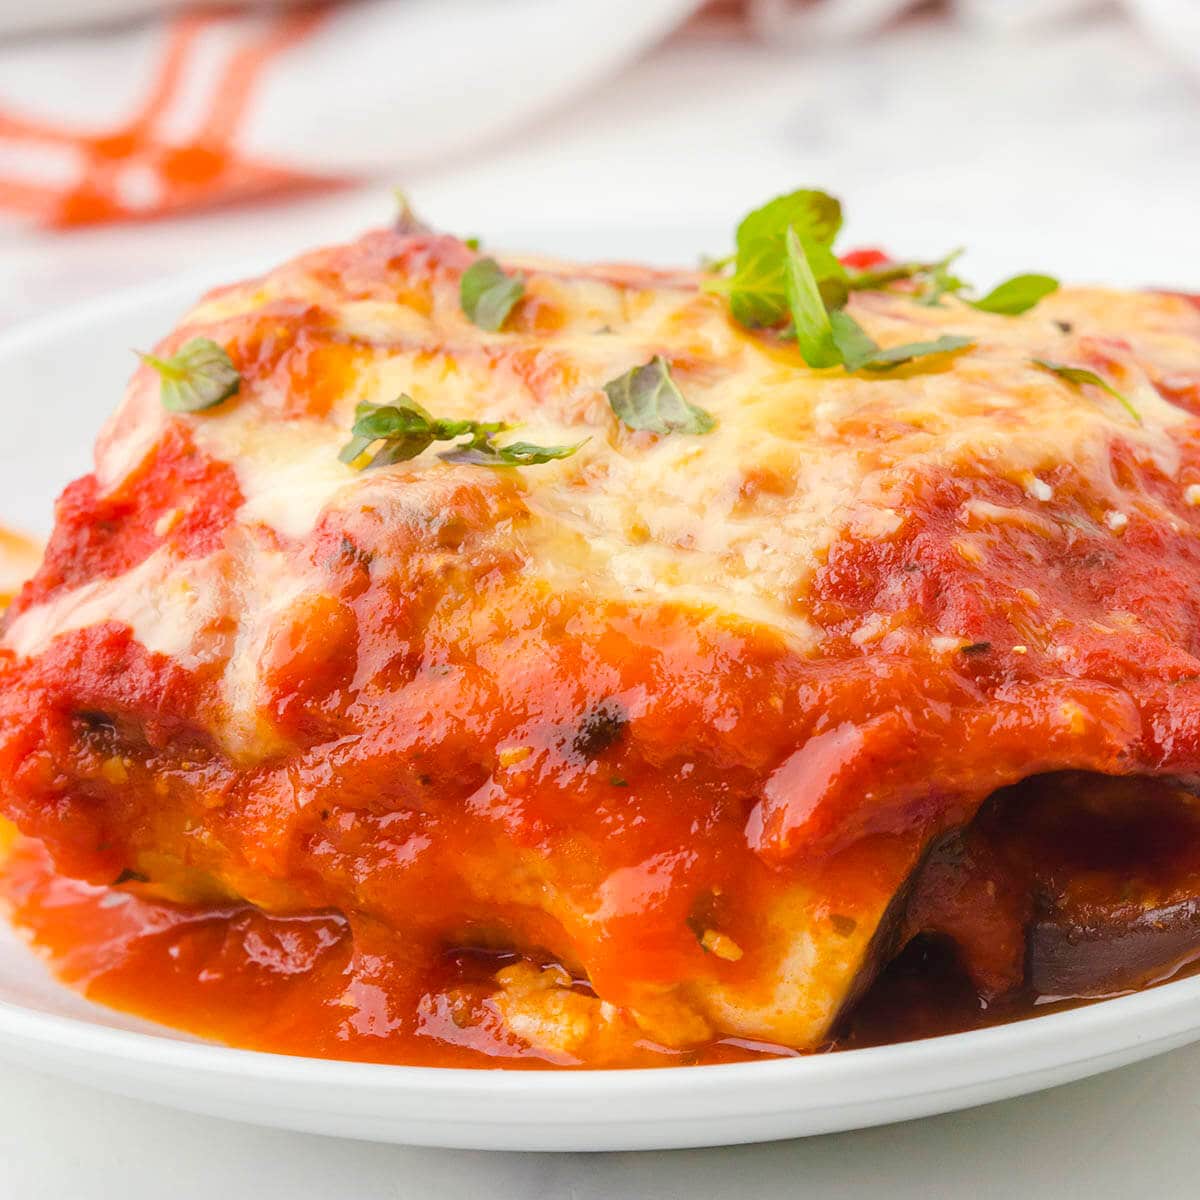 A serving of eggplant rollups on plate.